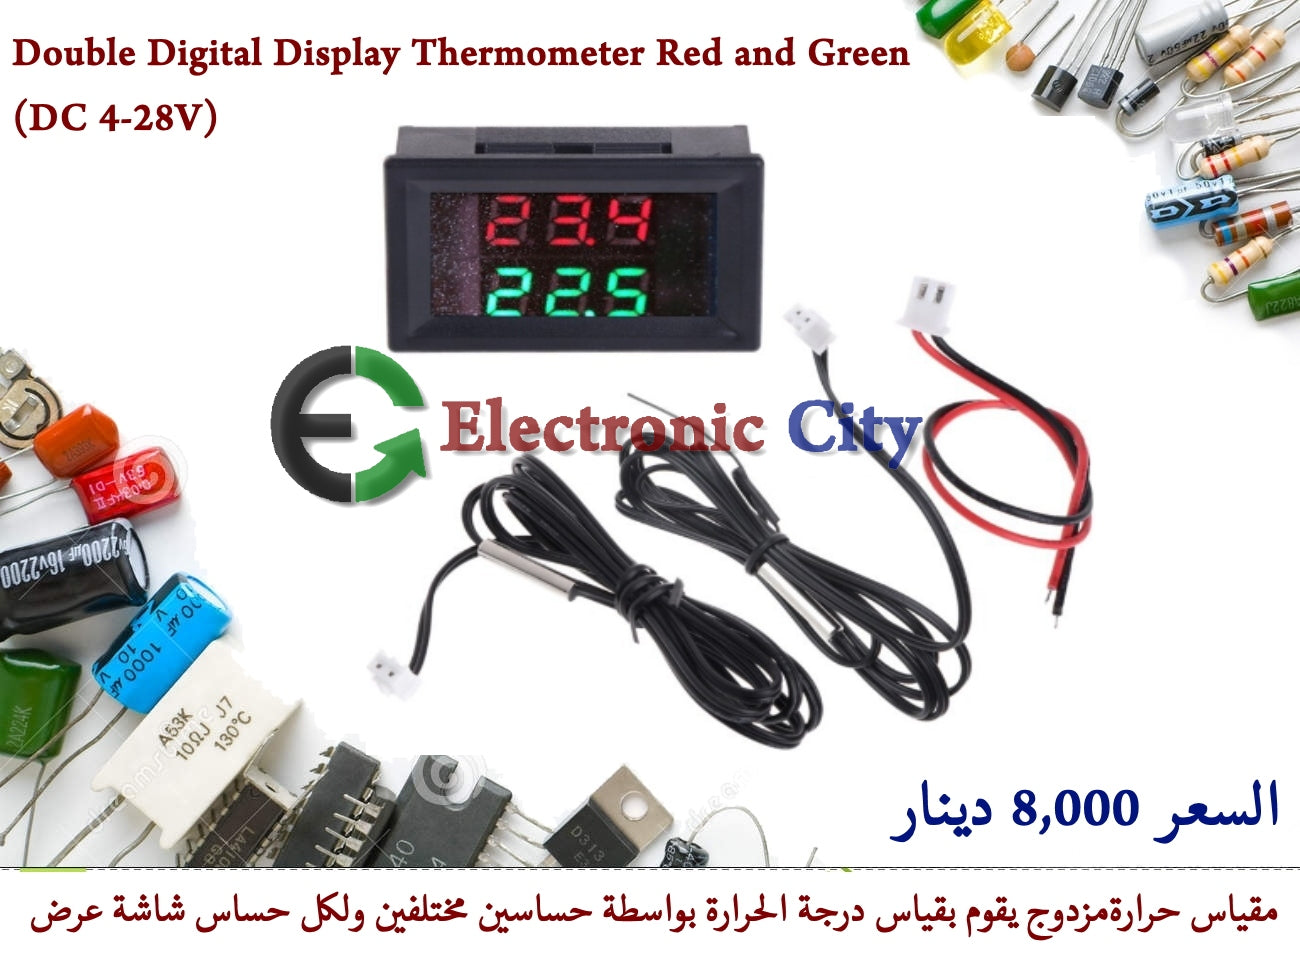 Double Digital Display Thermometer Red and Green (DC 4-28V)  #J1 X13211